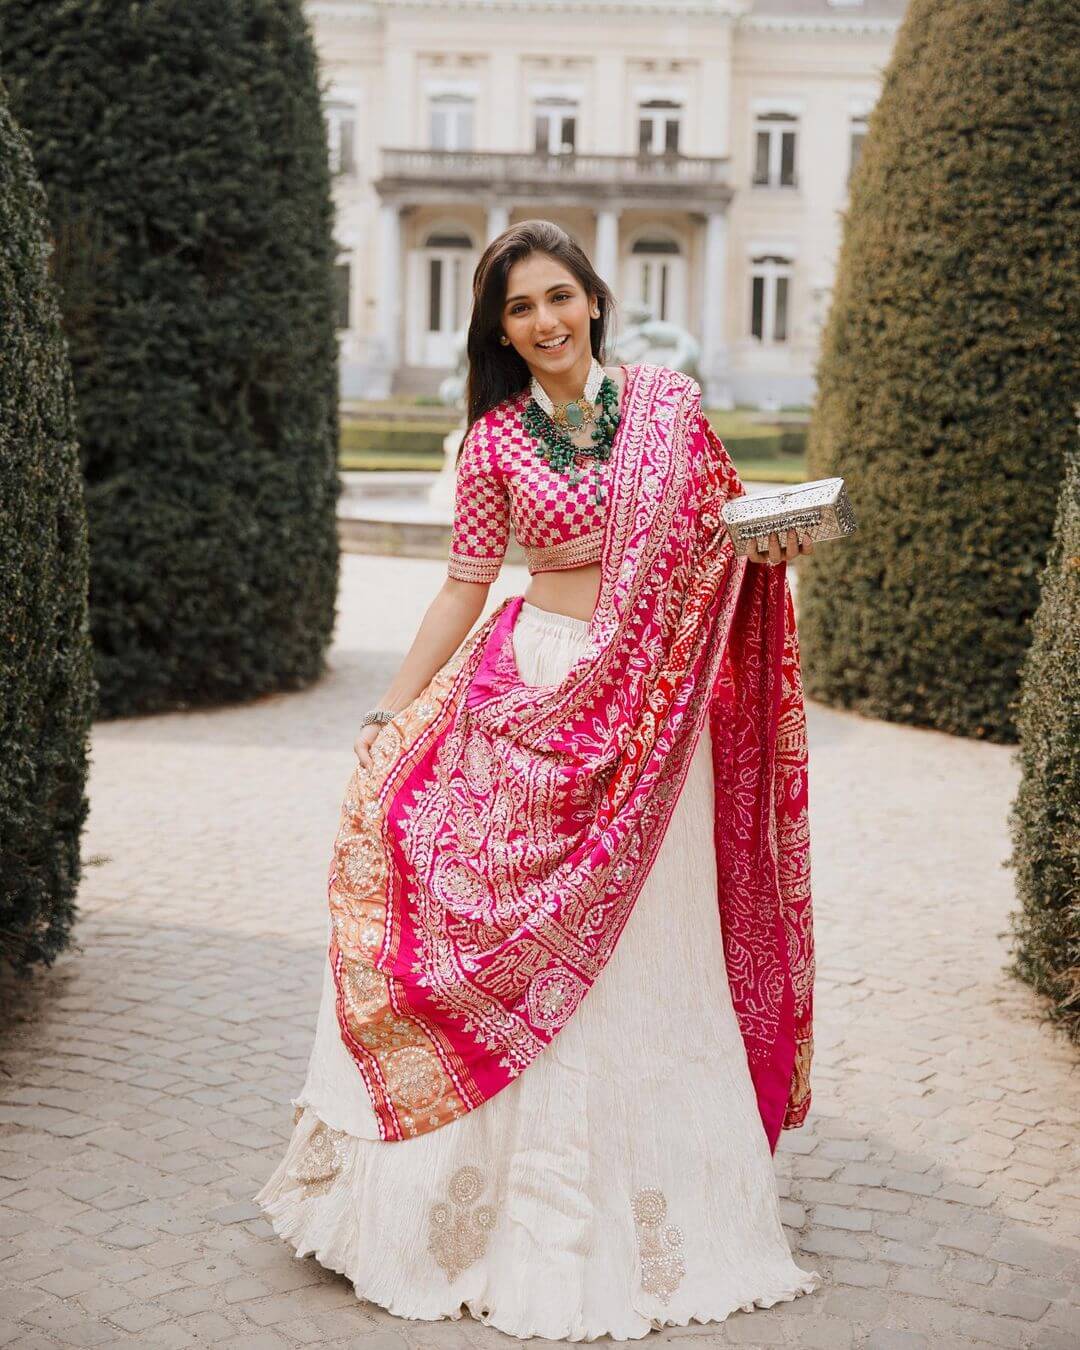 20+ Trending Diwali Outfit Ideas for you to choose from Peppy Pink and White Lehenga for a unique look